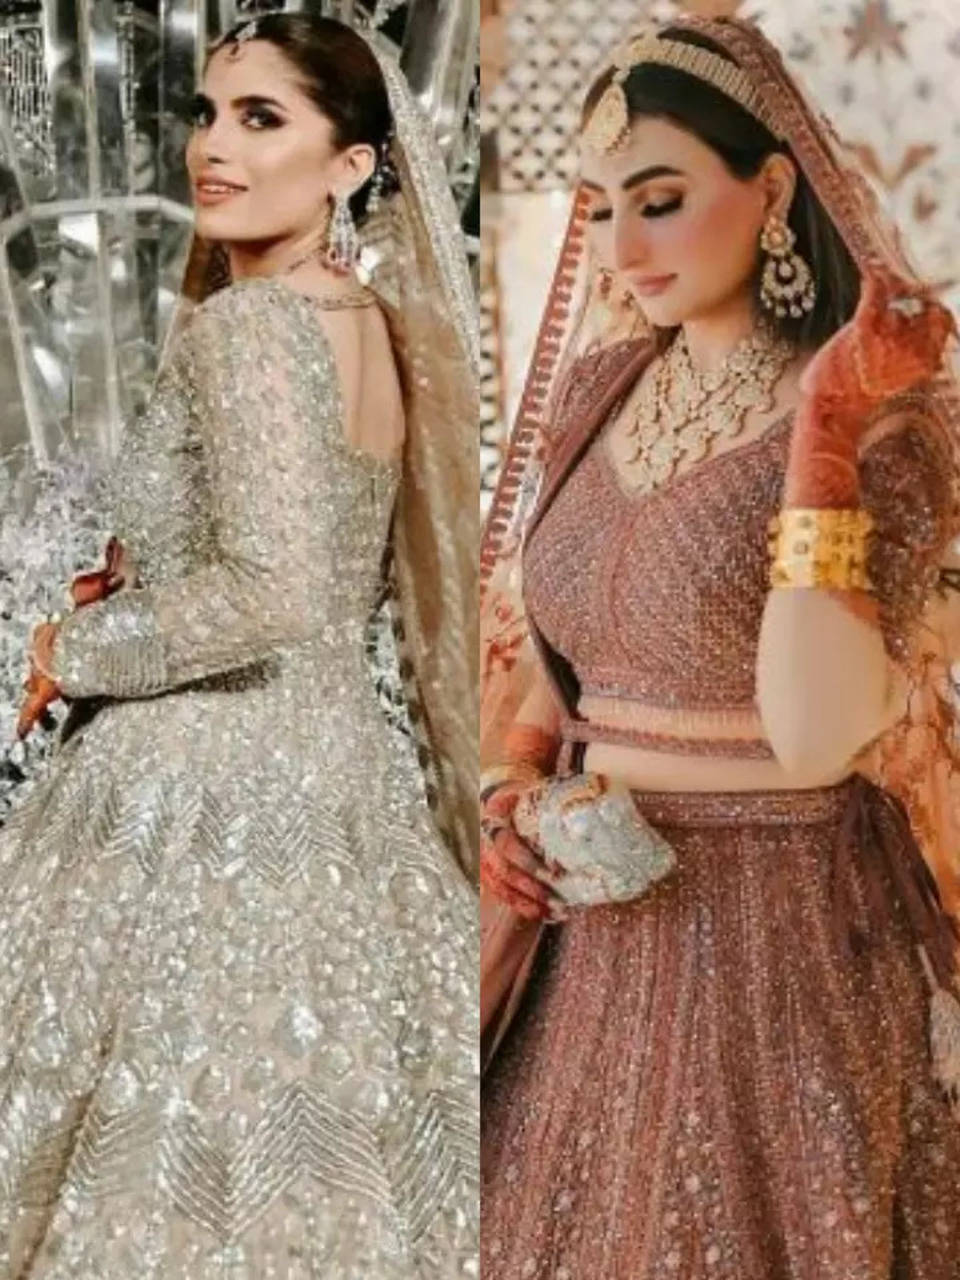 Pakistani brides who opted for Indian designer ensembles on their ...